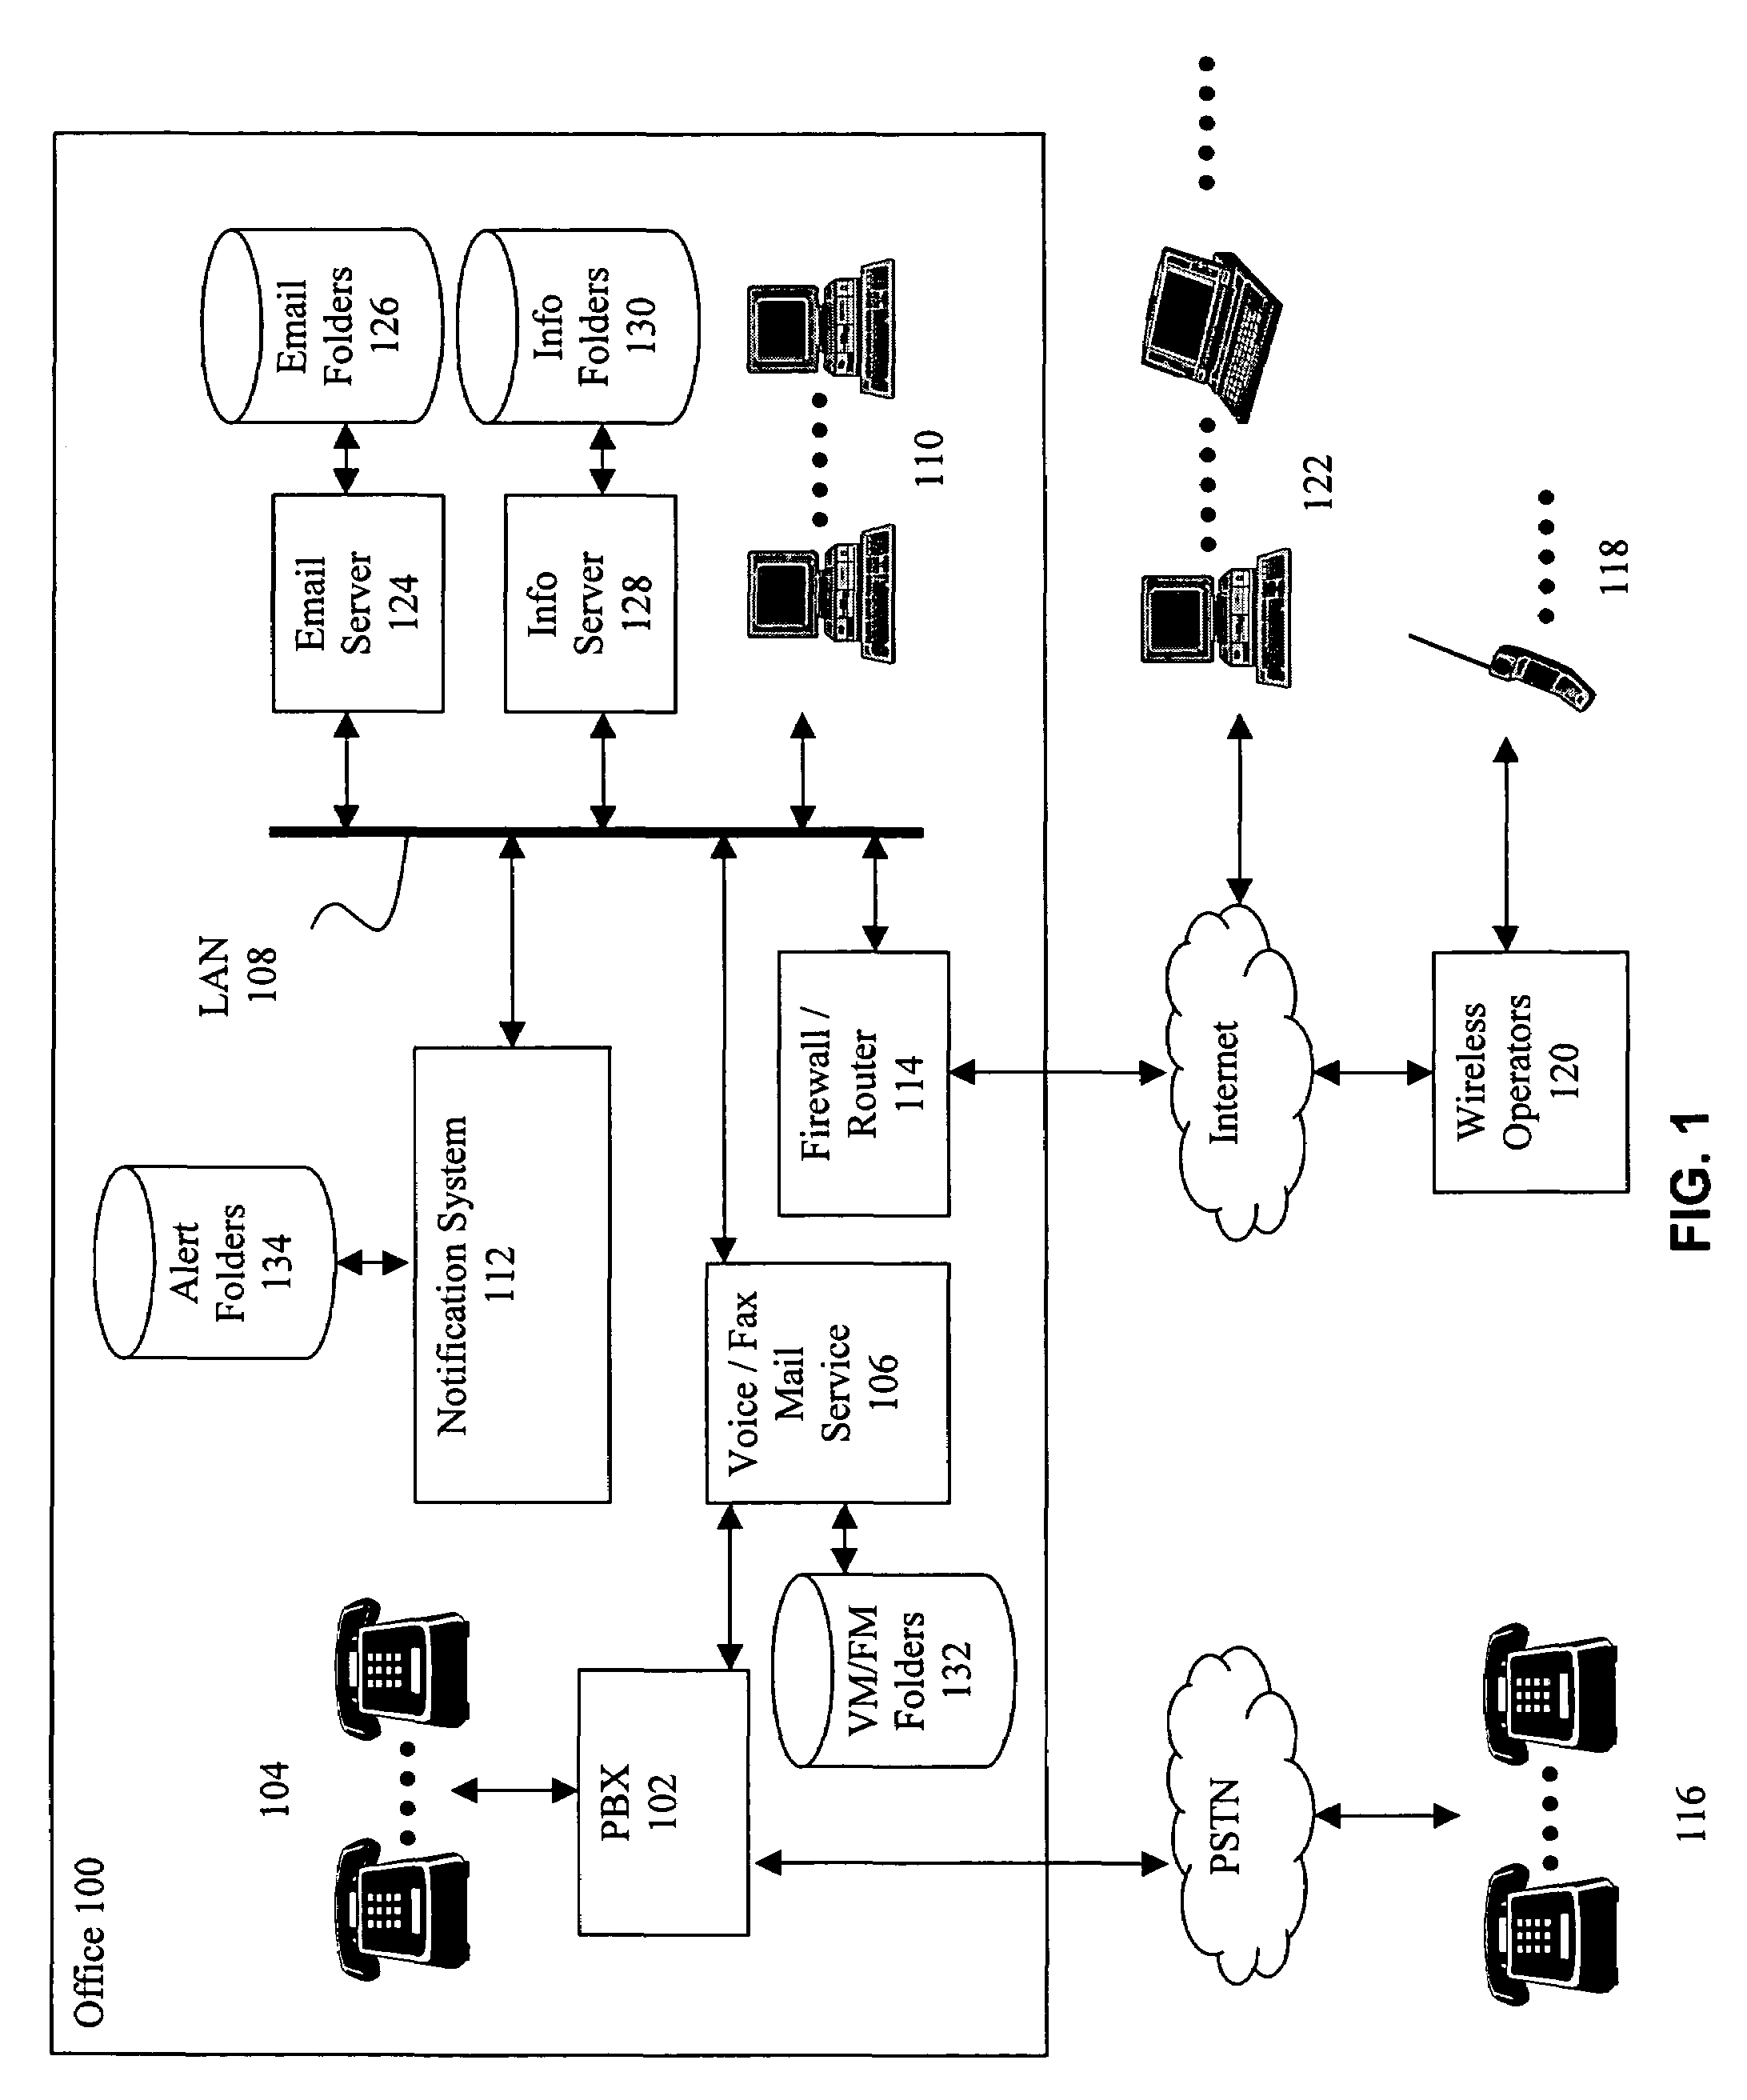 Method and system for providing remote access to previously transmitted enterprise messages